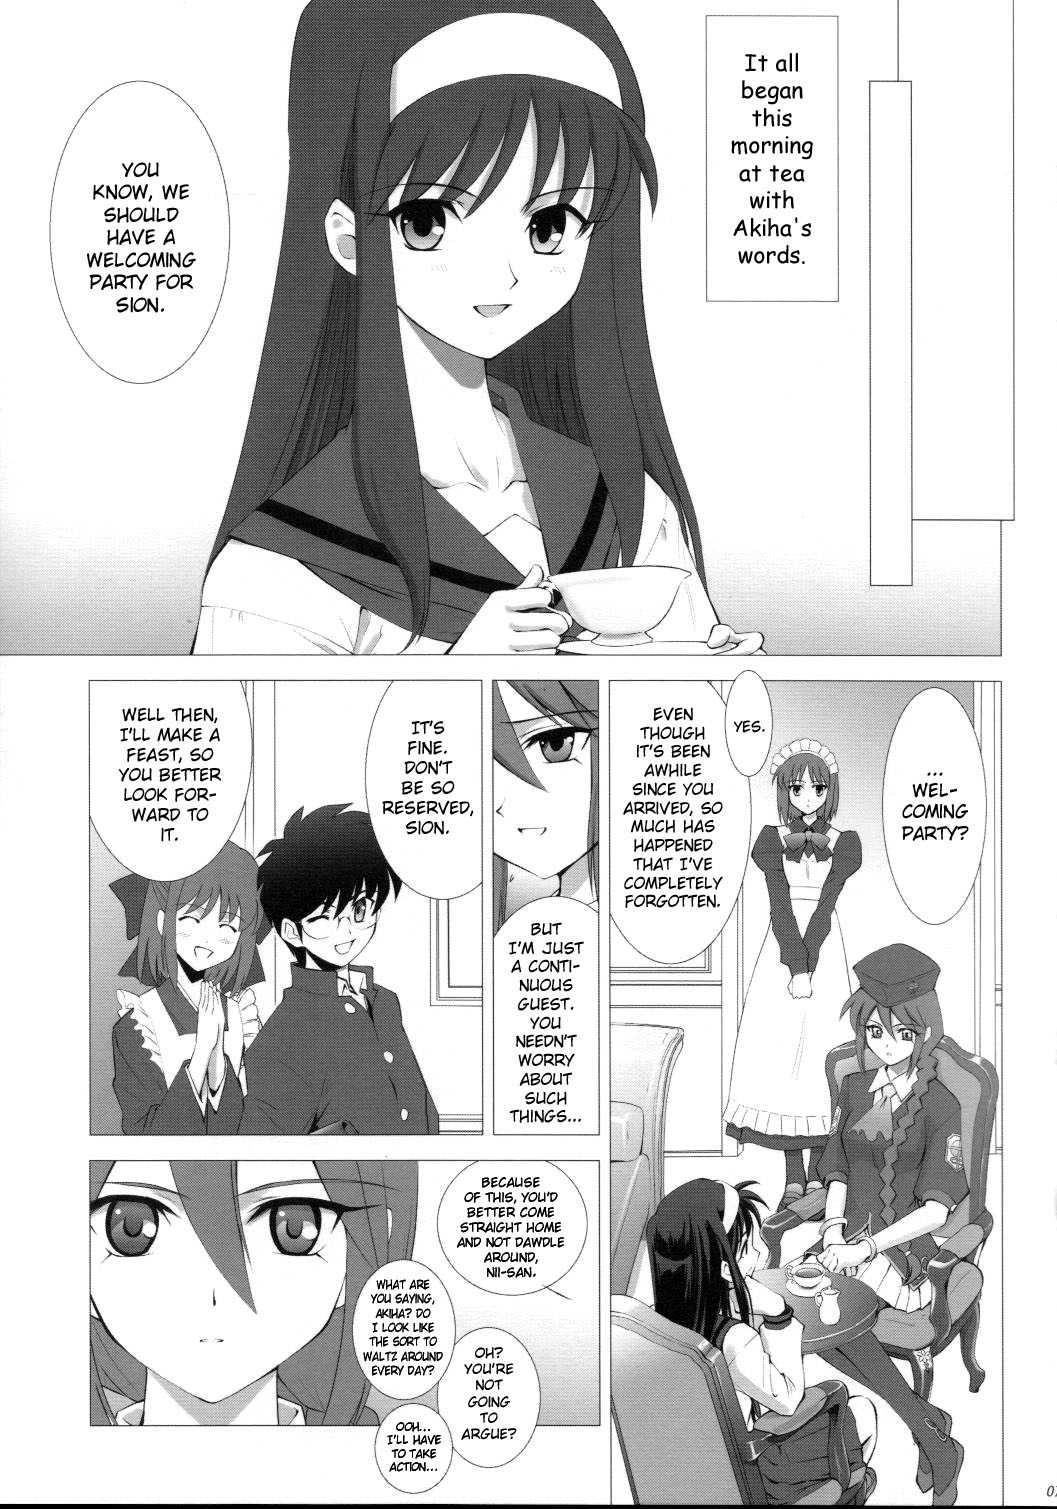 [Crazy Clover Club] Tsukihime Complex 3 &quot;red&quot; (Tsukihime) [English] [Crazy Clover Club]  月姫COMPLEX 3 &quot;red&quot; (月姫)